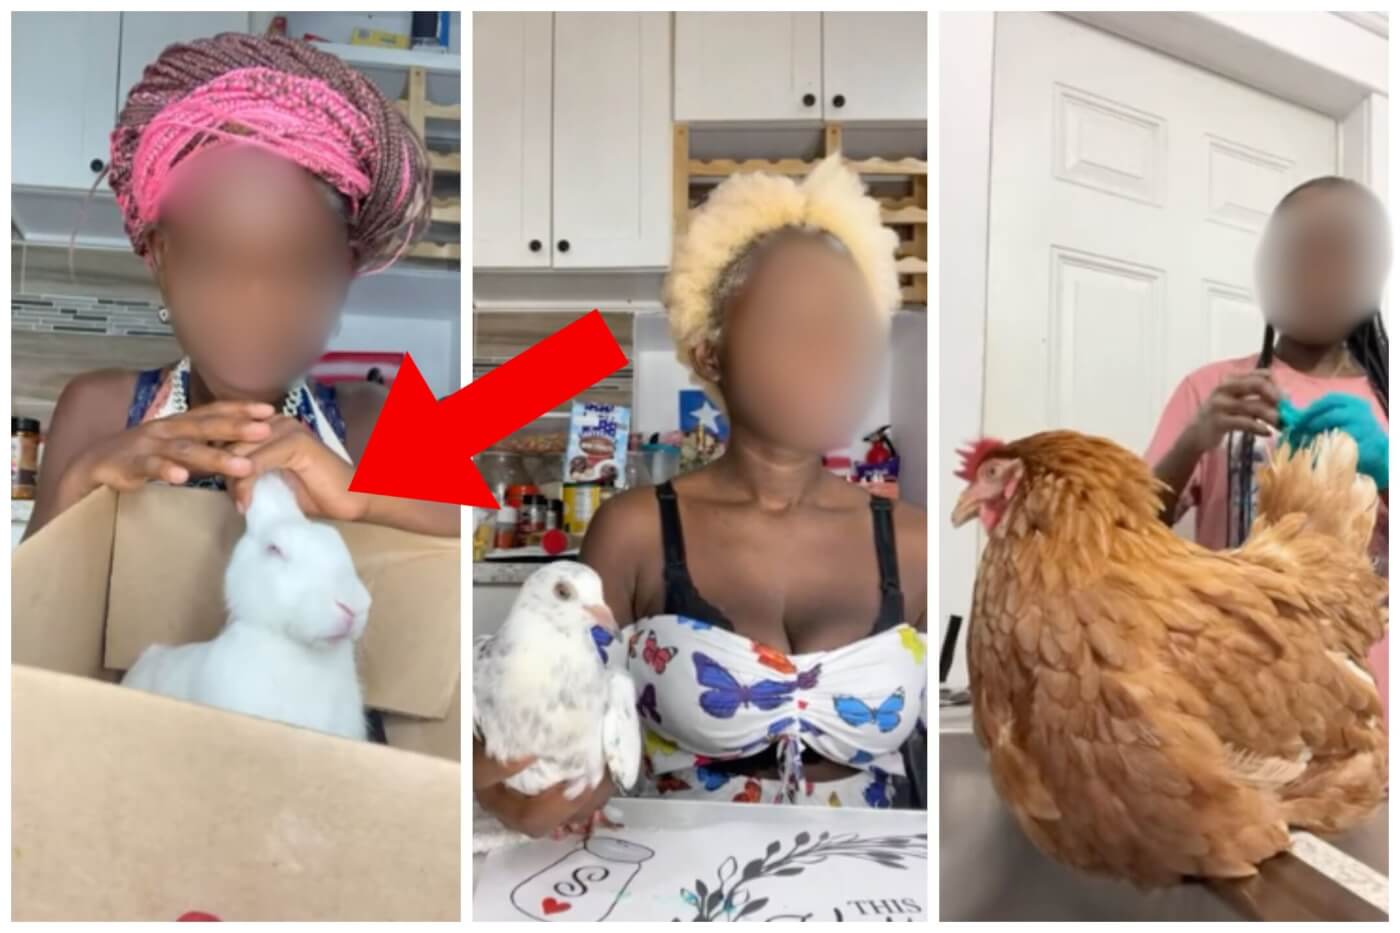 three separate stills from a woman's horrific 'crush videos,' showing her with a rabbit, a pigeon, and a chicken